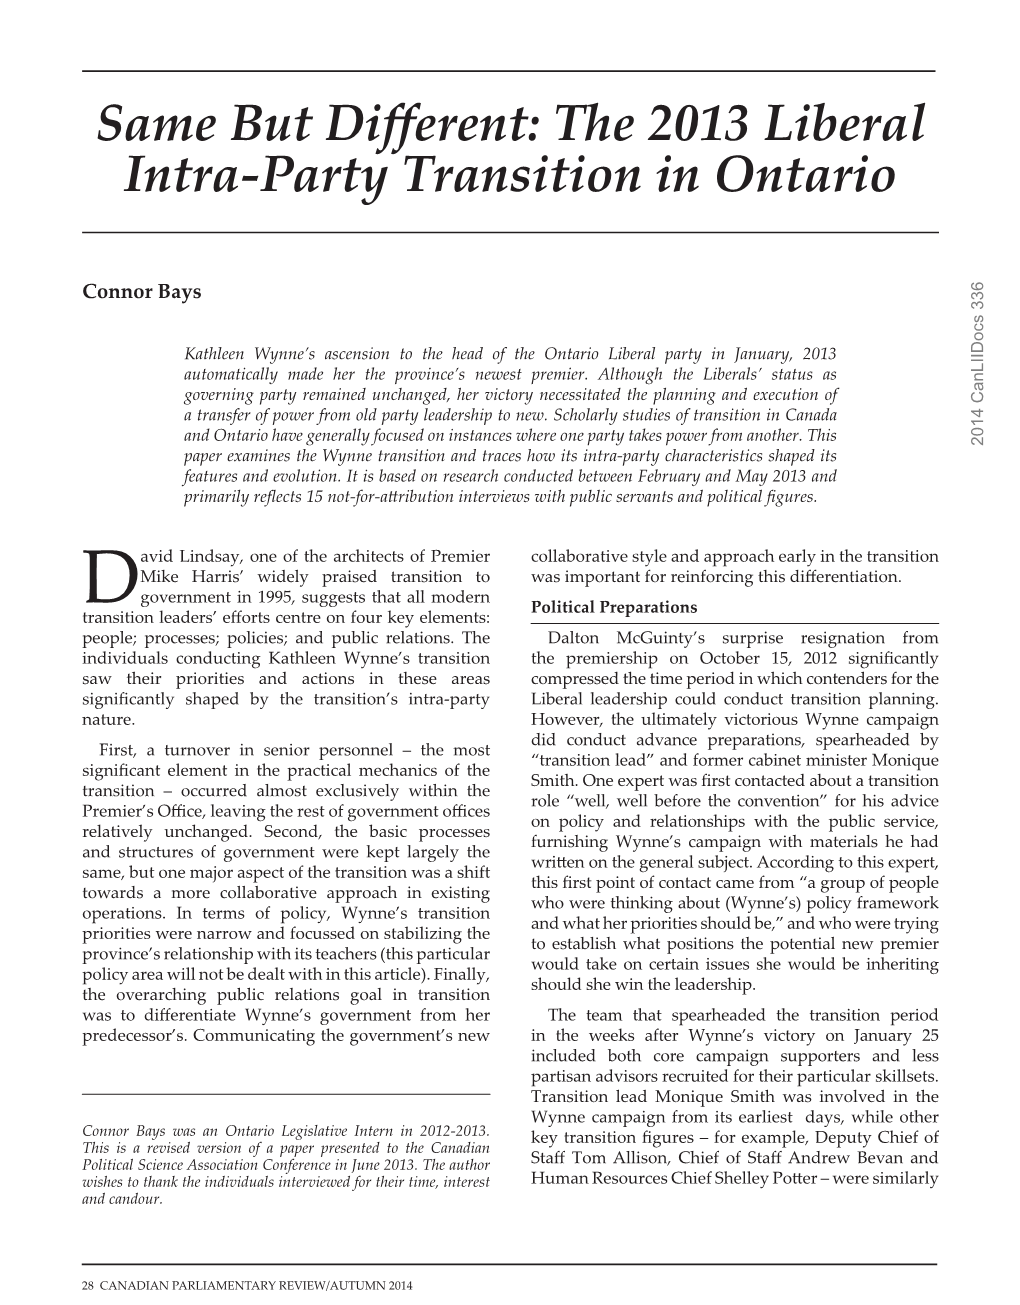 Same but Different: the 2013 Liberal Intra-Party Transition in Ontario